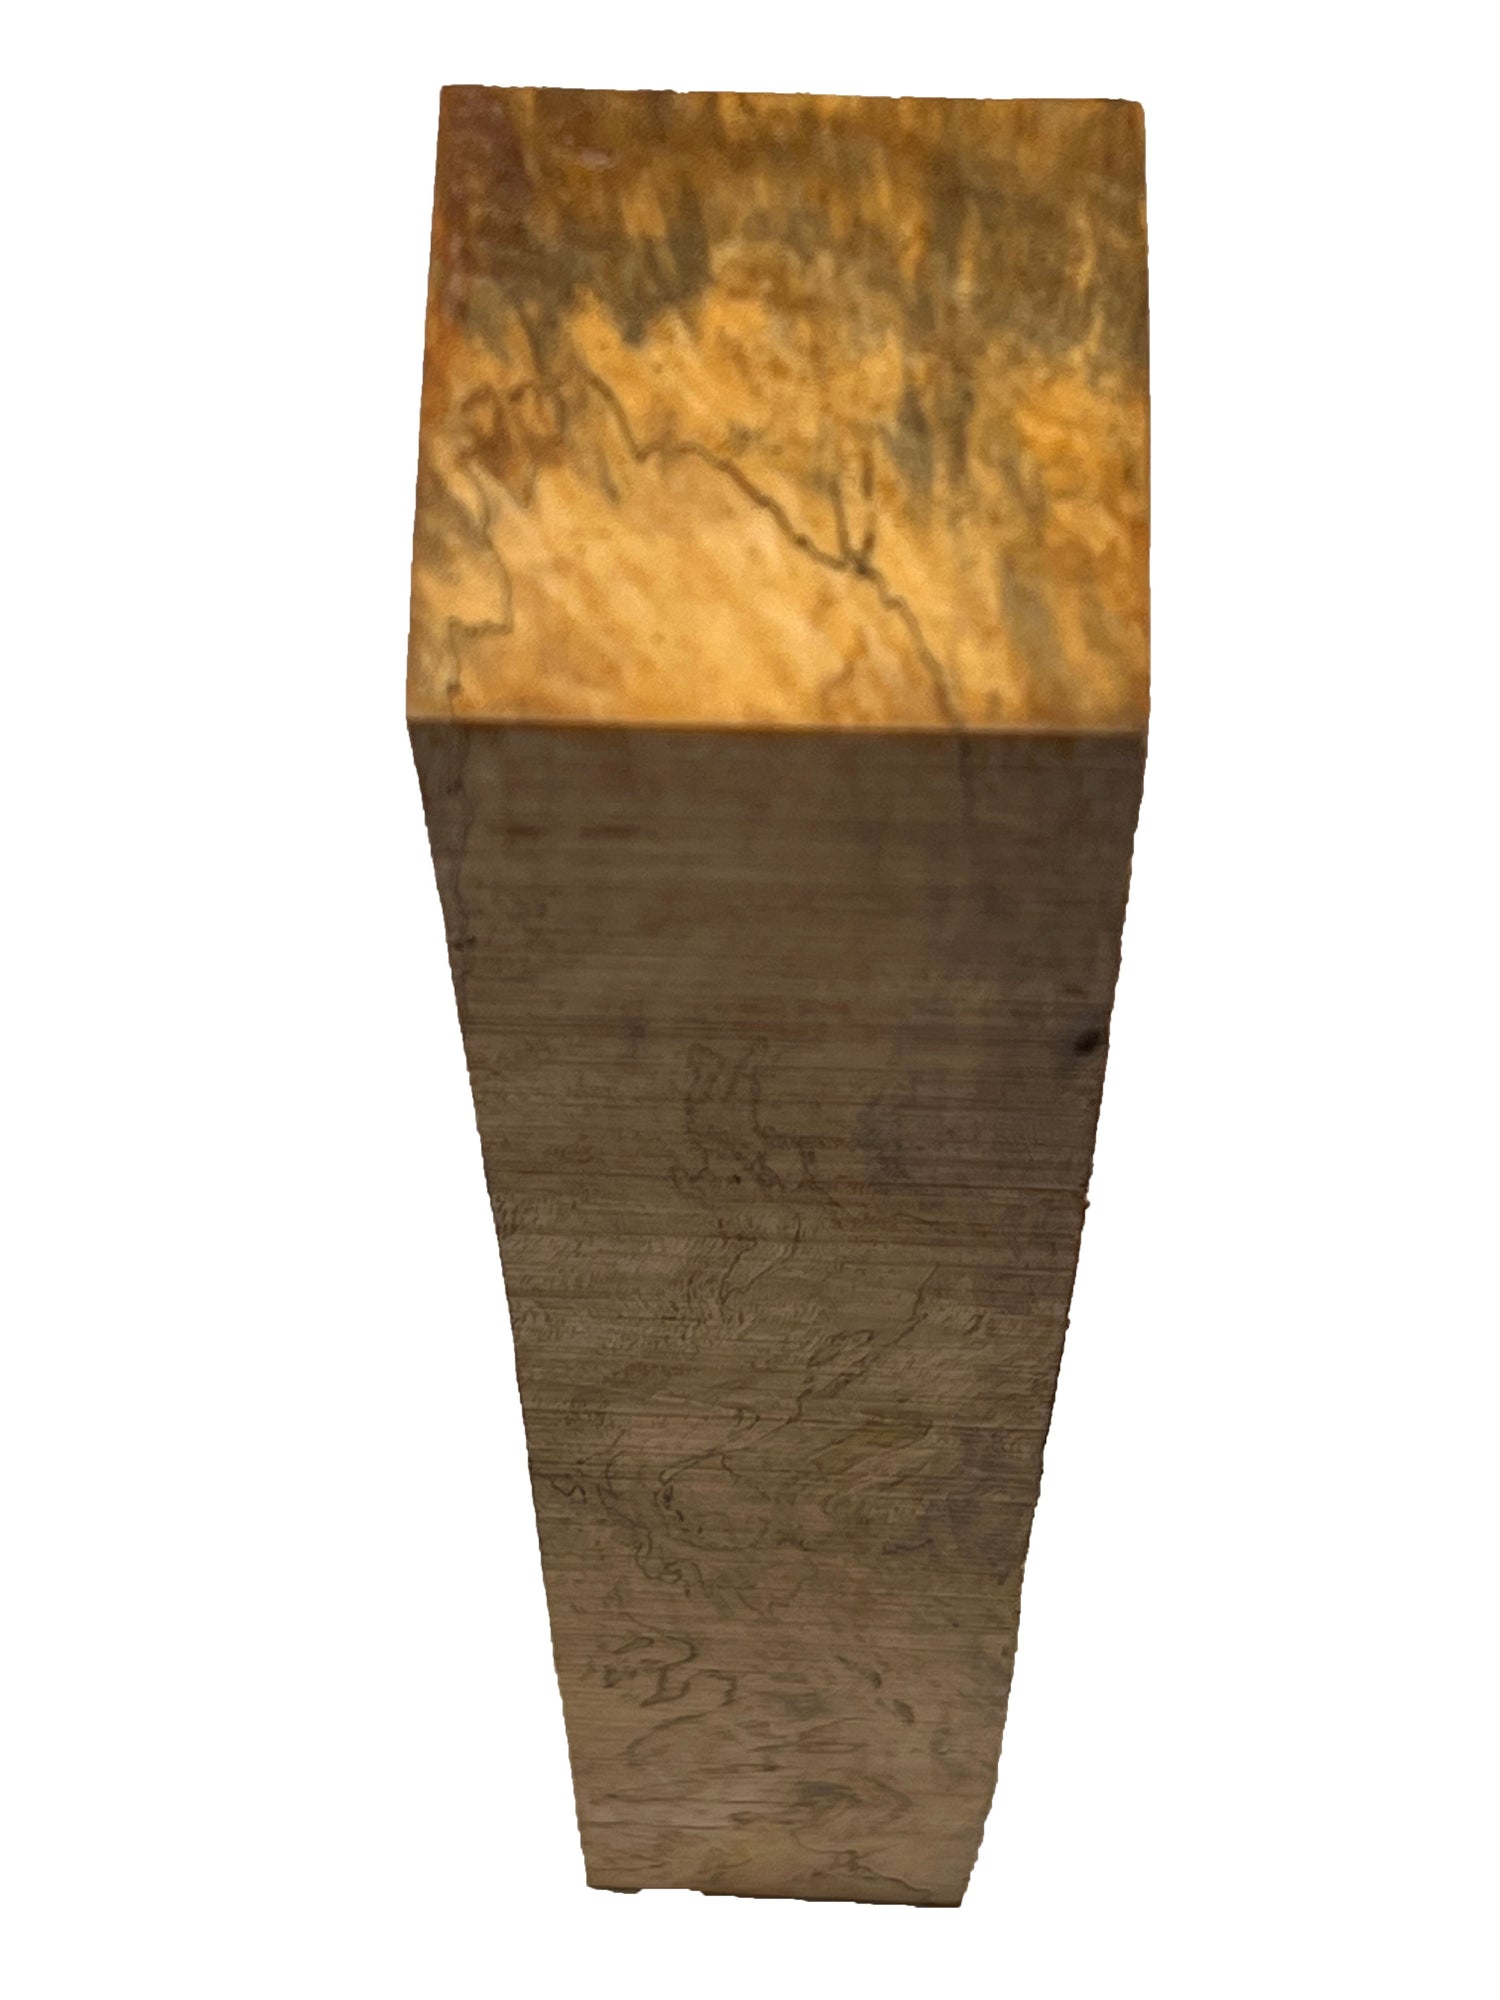 Combo Pack 5, Spalted Tamarind Turning Blanks 18” x 2” x 2” - Exotic Wood Zone - Buy online Across USA 